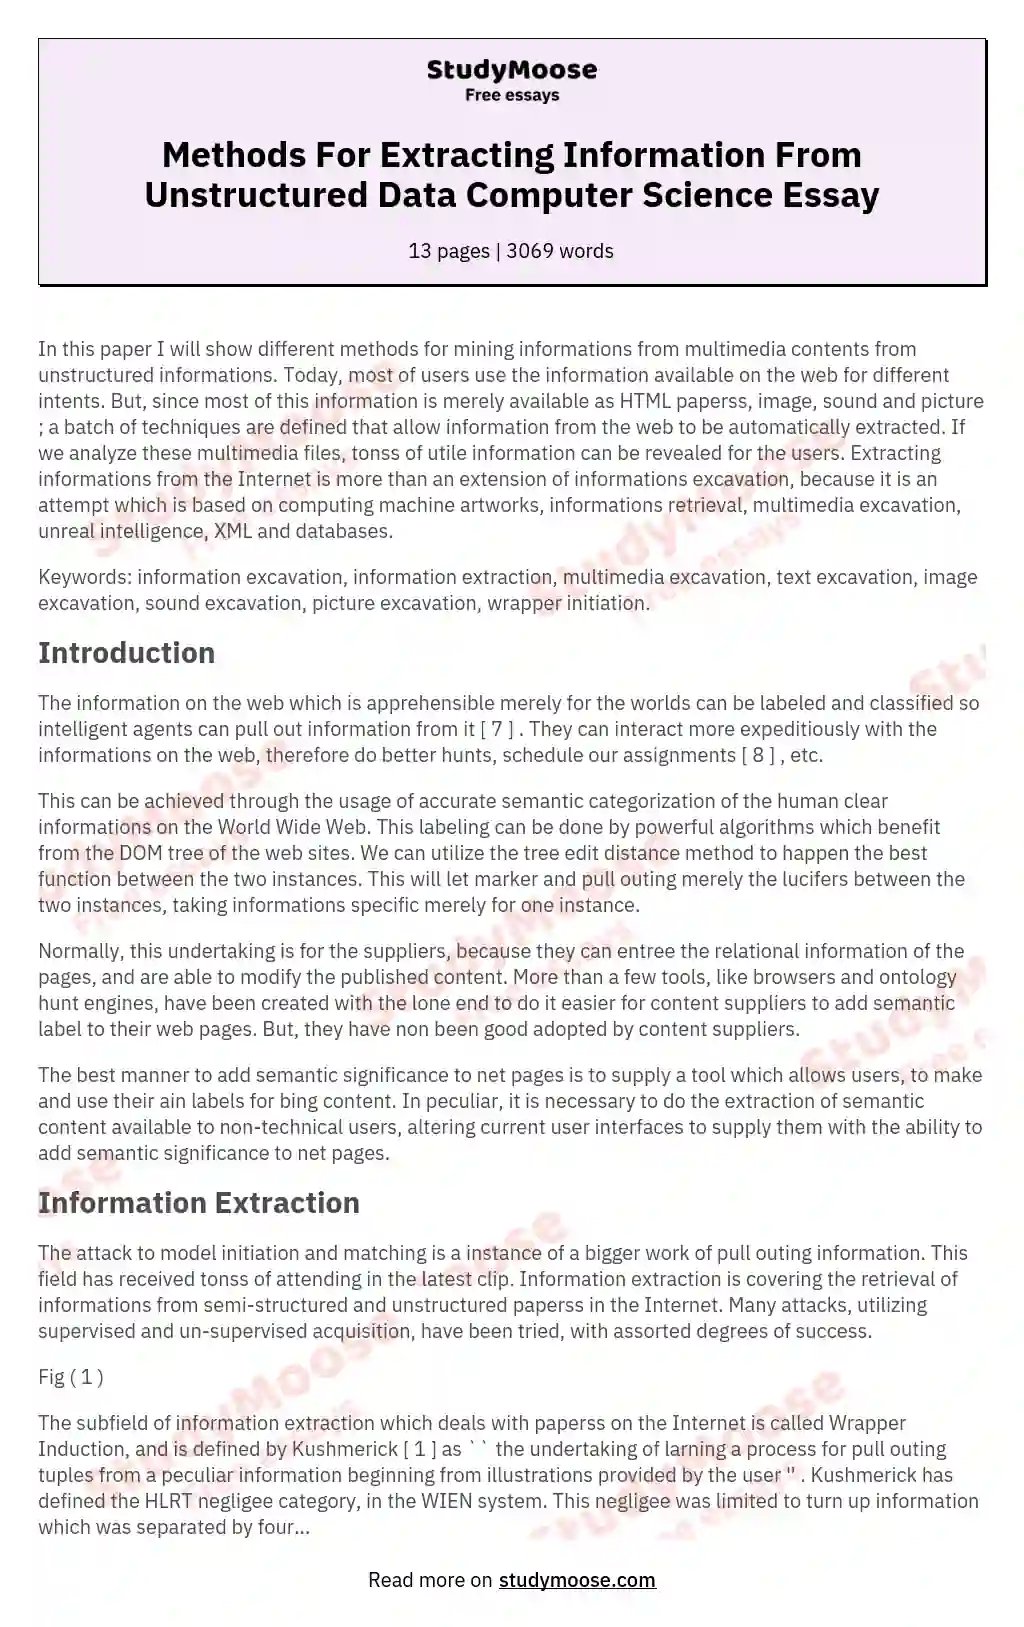 Methods For Extracting Information From Unstructured Data Computer Science Essay essay